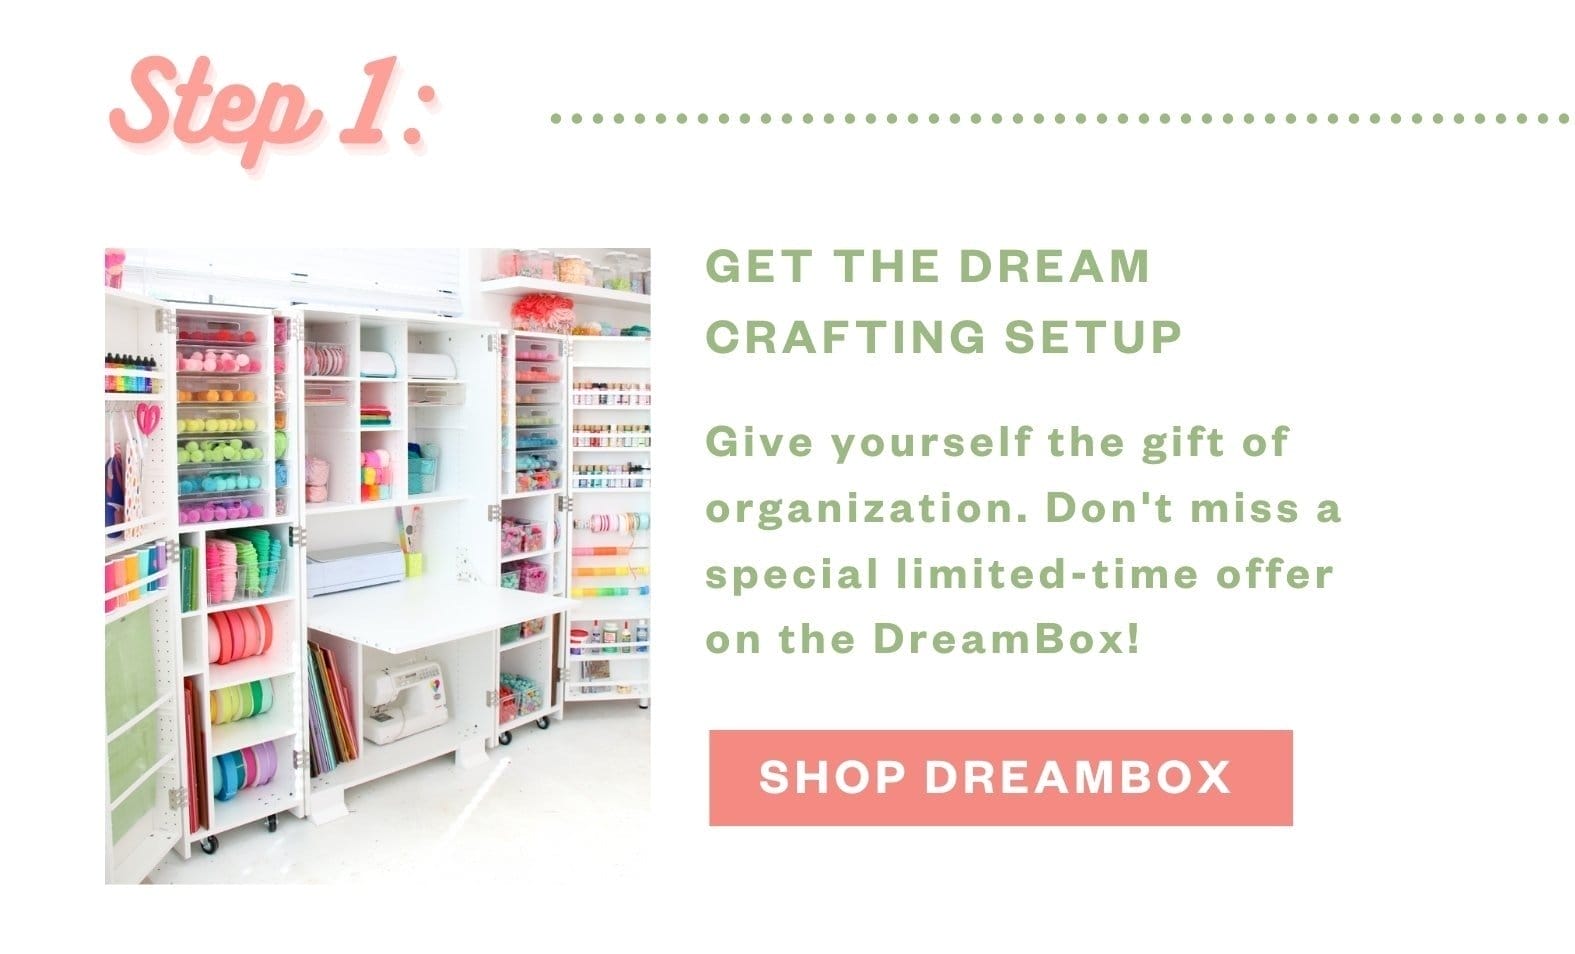 Step 1: Get the DreamBox at a special limited-time price!